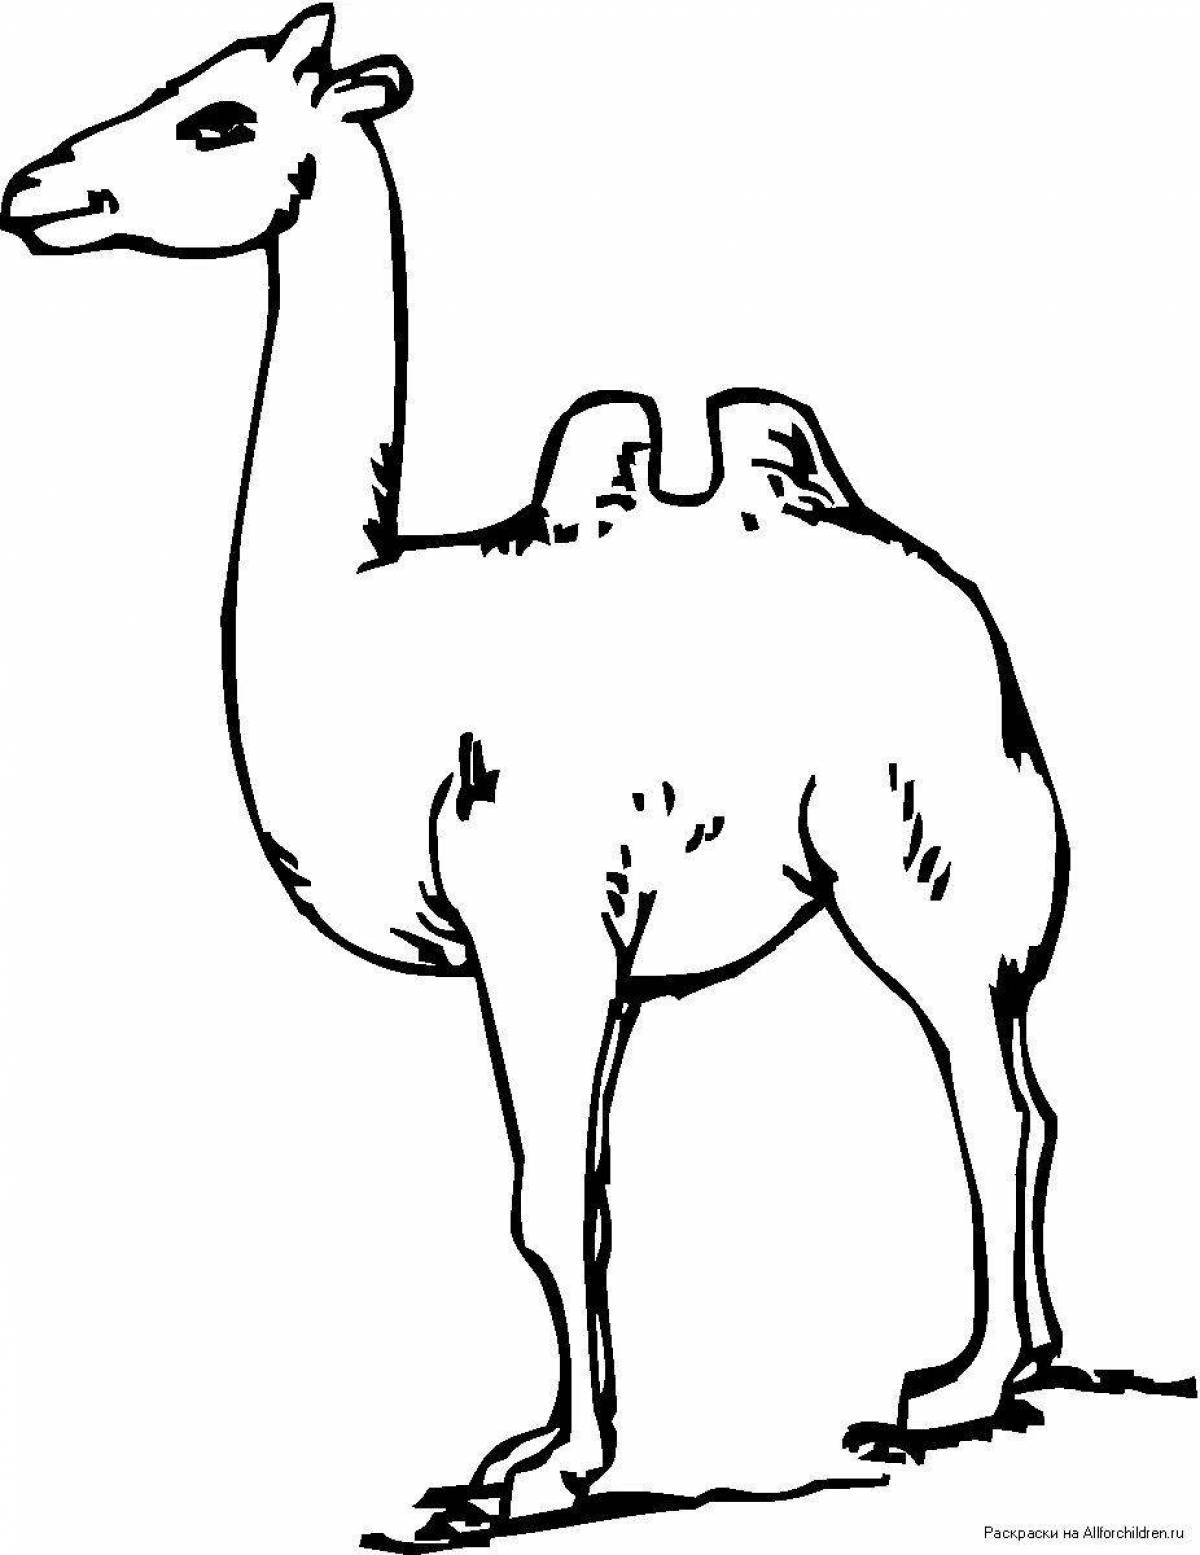 Adorable camel coloring book for kids 6-7 years old